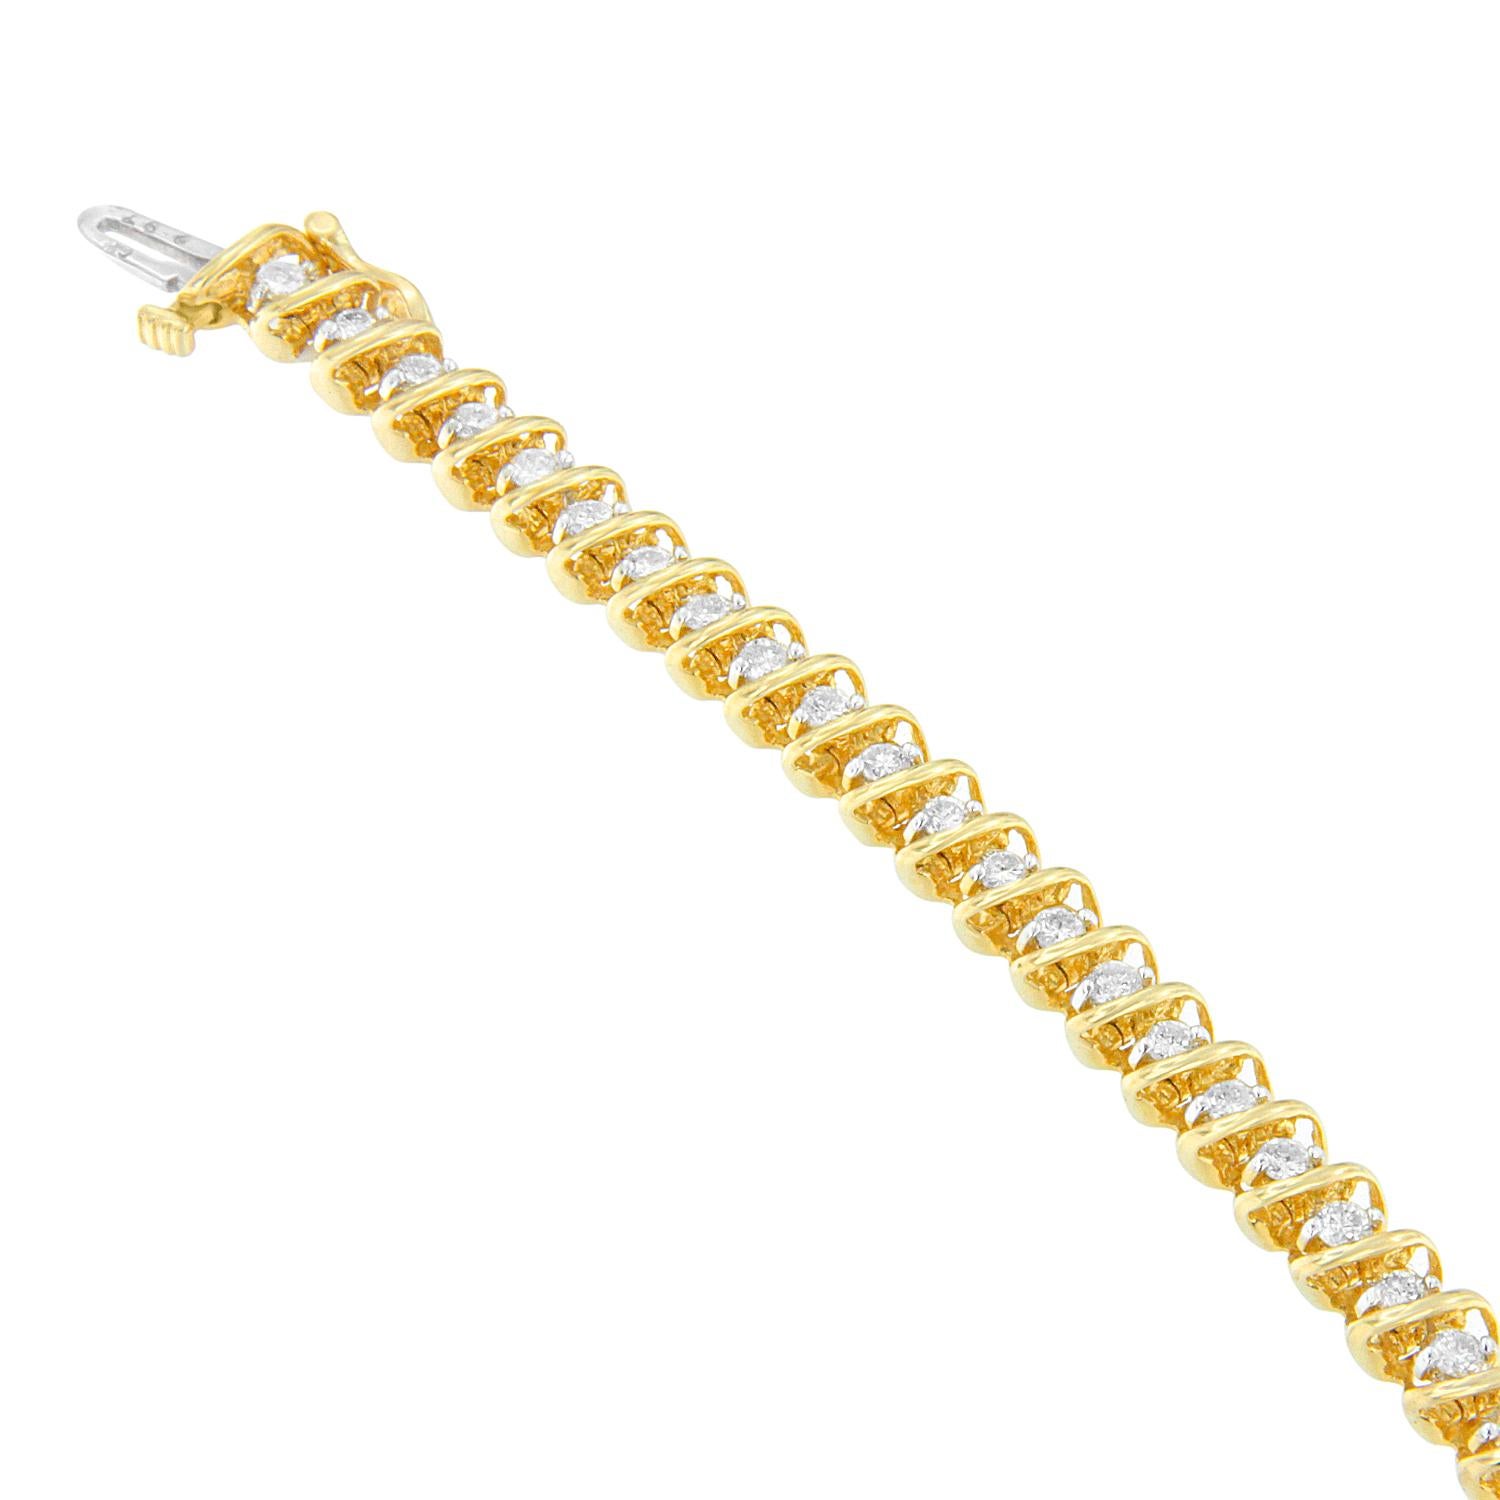 Bold meets brilliant! This unique bracelet is crafted with classic round cut diamonds nestled between raised bands of high shine yellow gold to form a dazzling spiral effect for the woman who loves to stand out from the crowd. Bracelet has 42